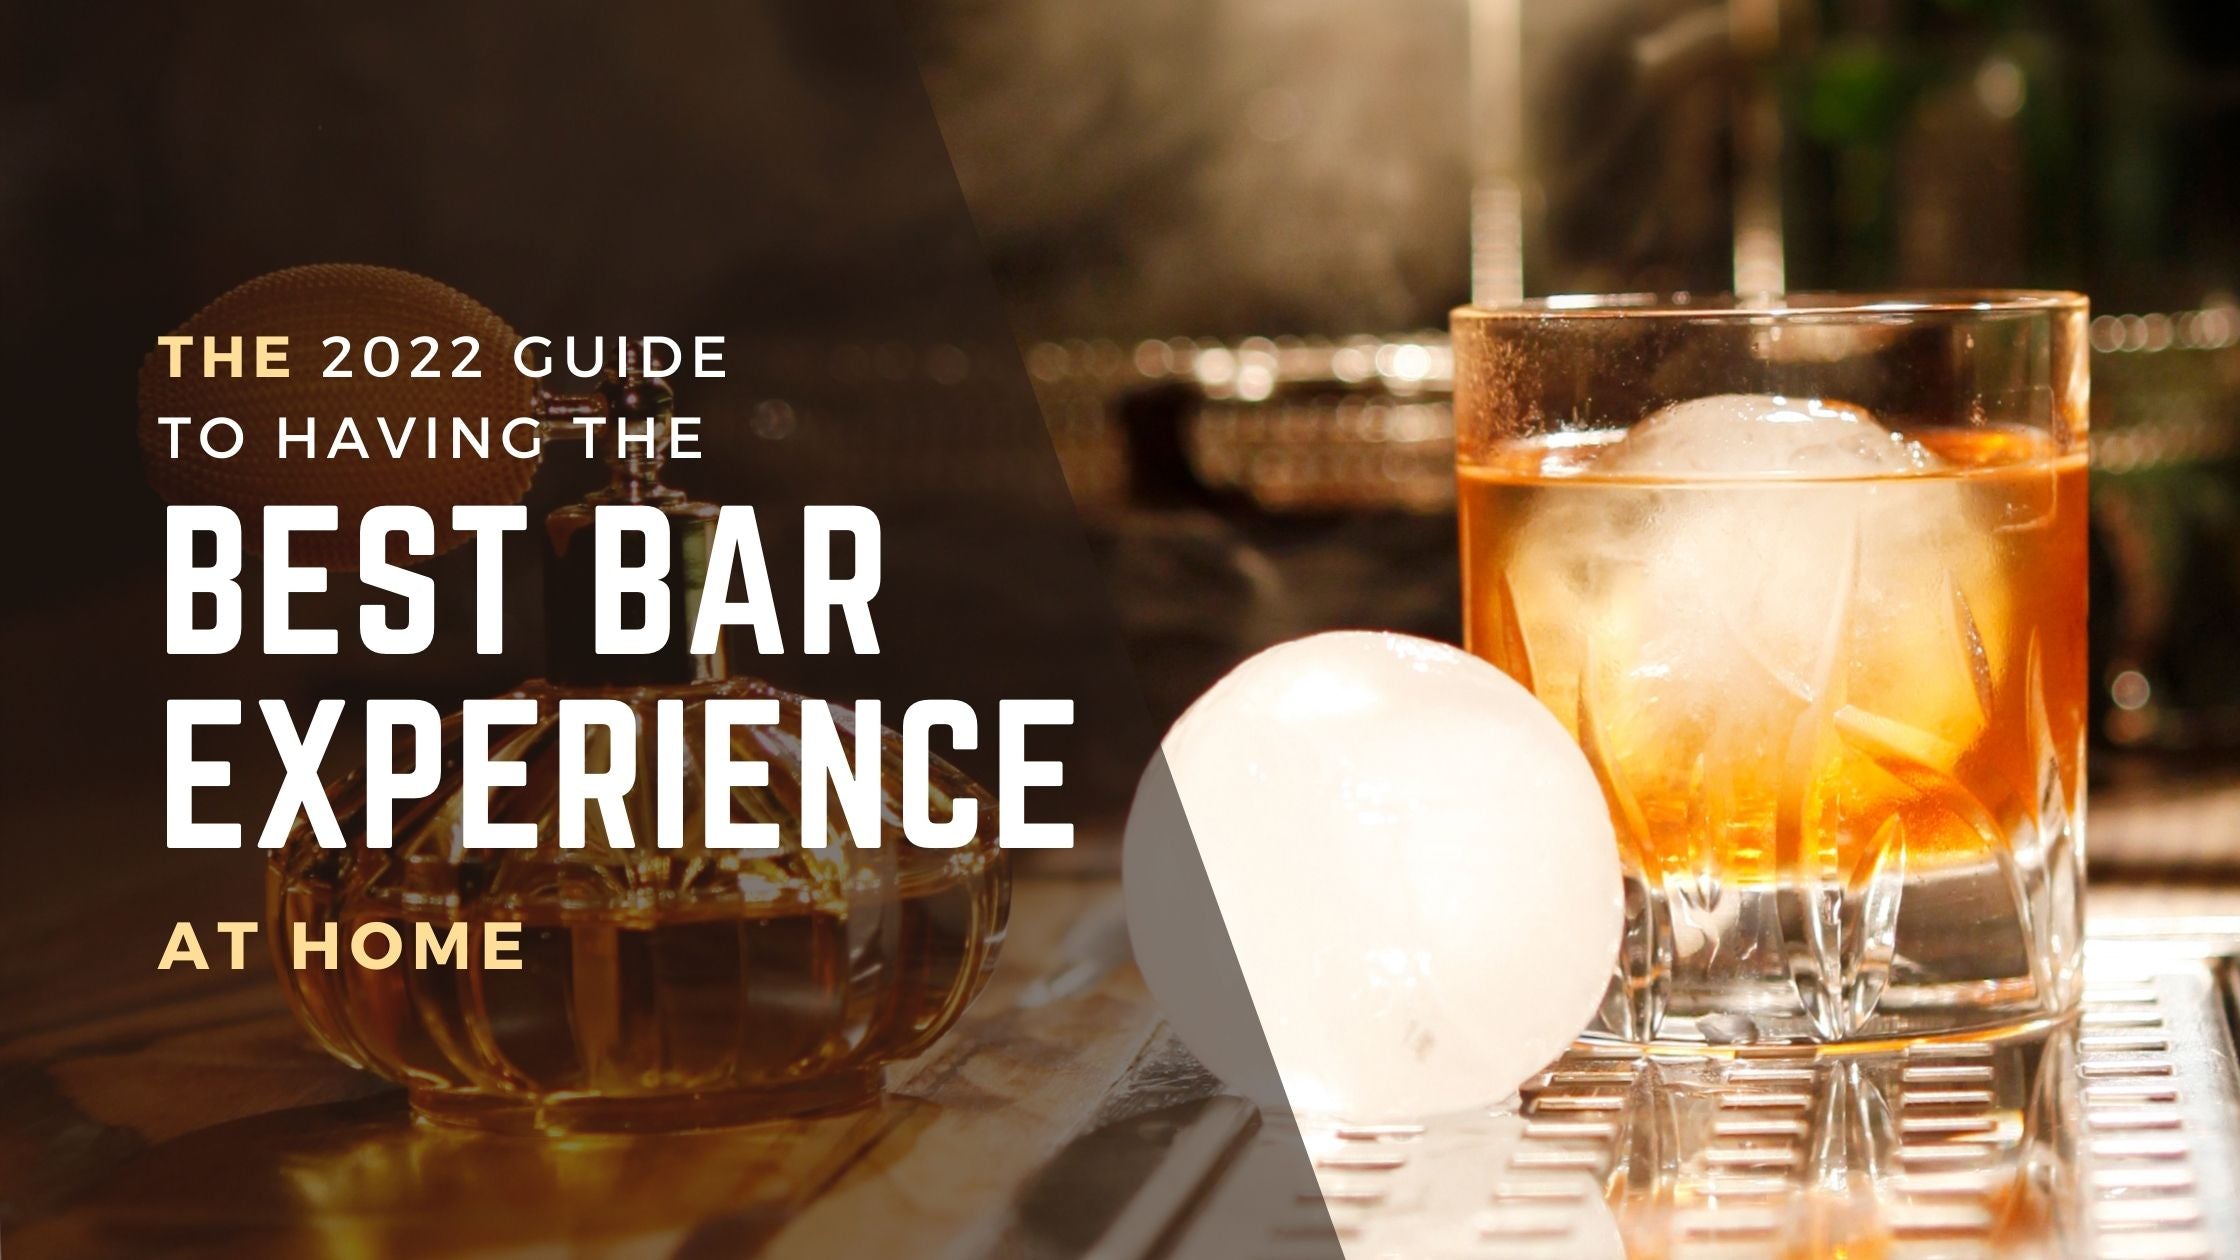 The 2022 Guide To Having The Best Bar Experience At Home